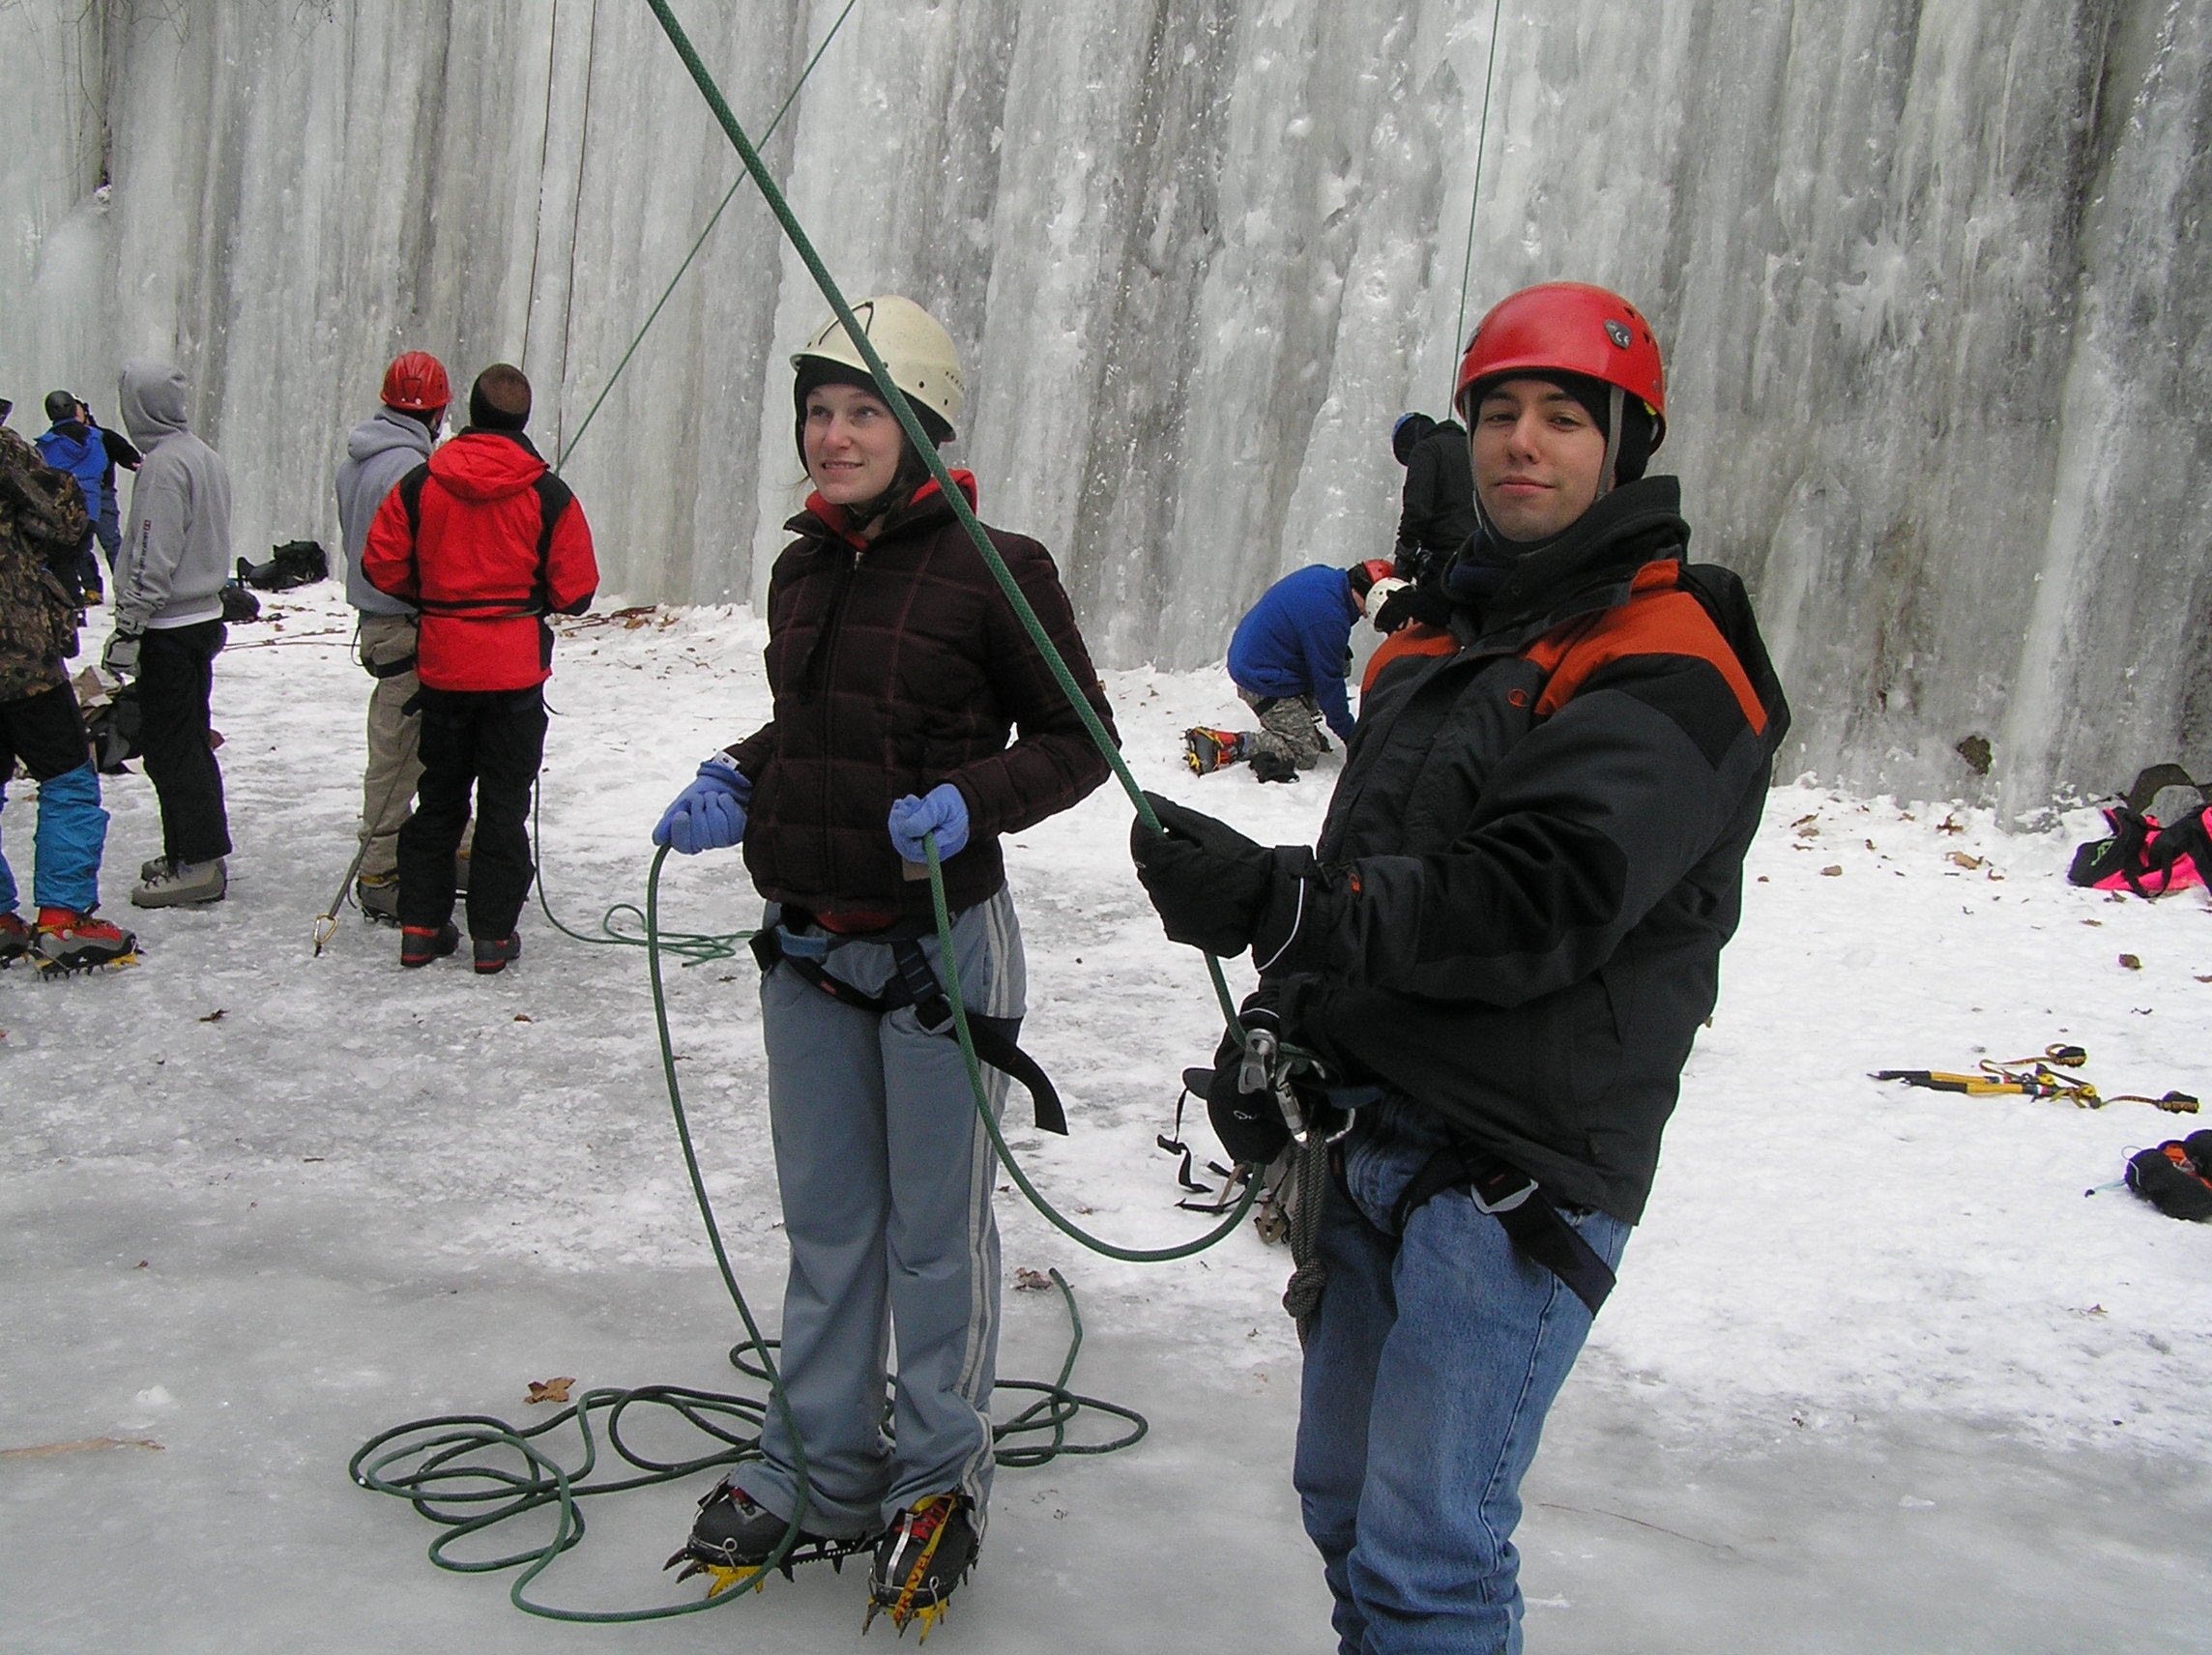 Umass Lowell students in the ice canyon